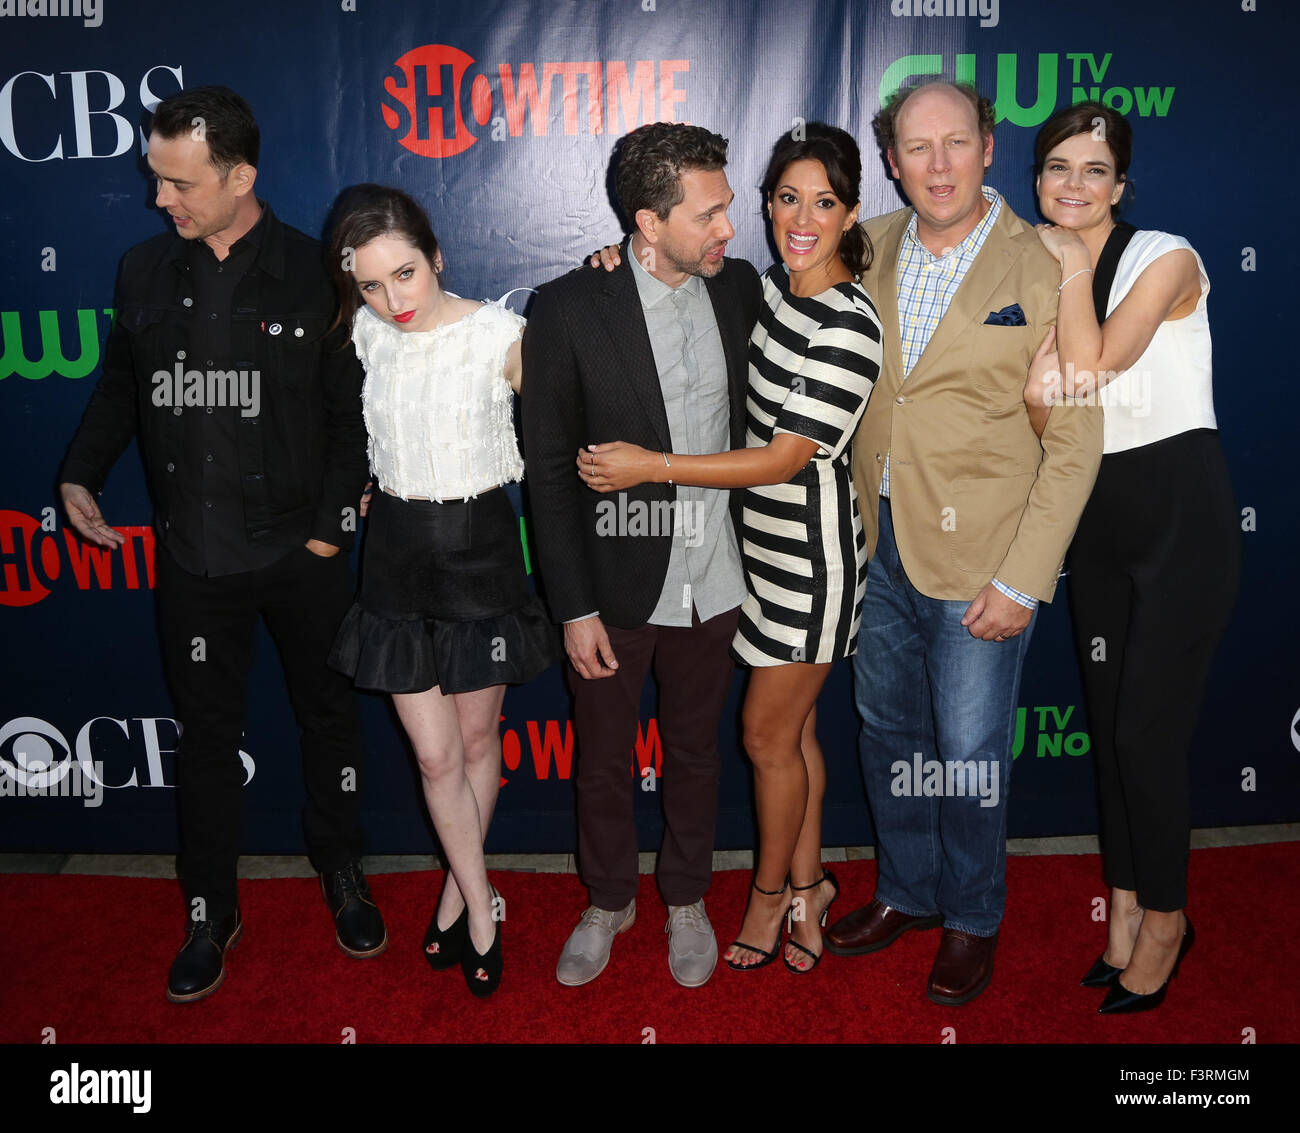 Celebrities attend the CBS, The CW, and Showtime 2015 Summer TCA Party  at Pacific Design Center.  Featuring: Colin Hanks, Zoe Lister Jones, Thomas Sadoski, Angelique Cabral, Dan Bakkedahl, Betsy Brandt Where: Los Angeles, California, United States When: Stock Photo